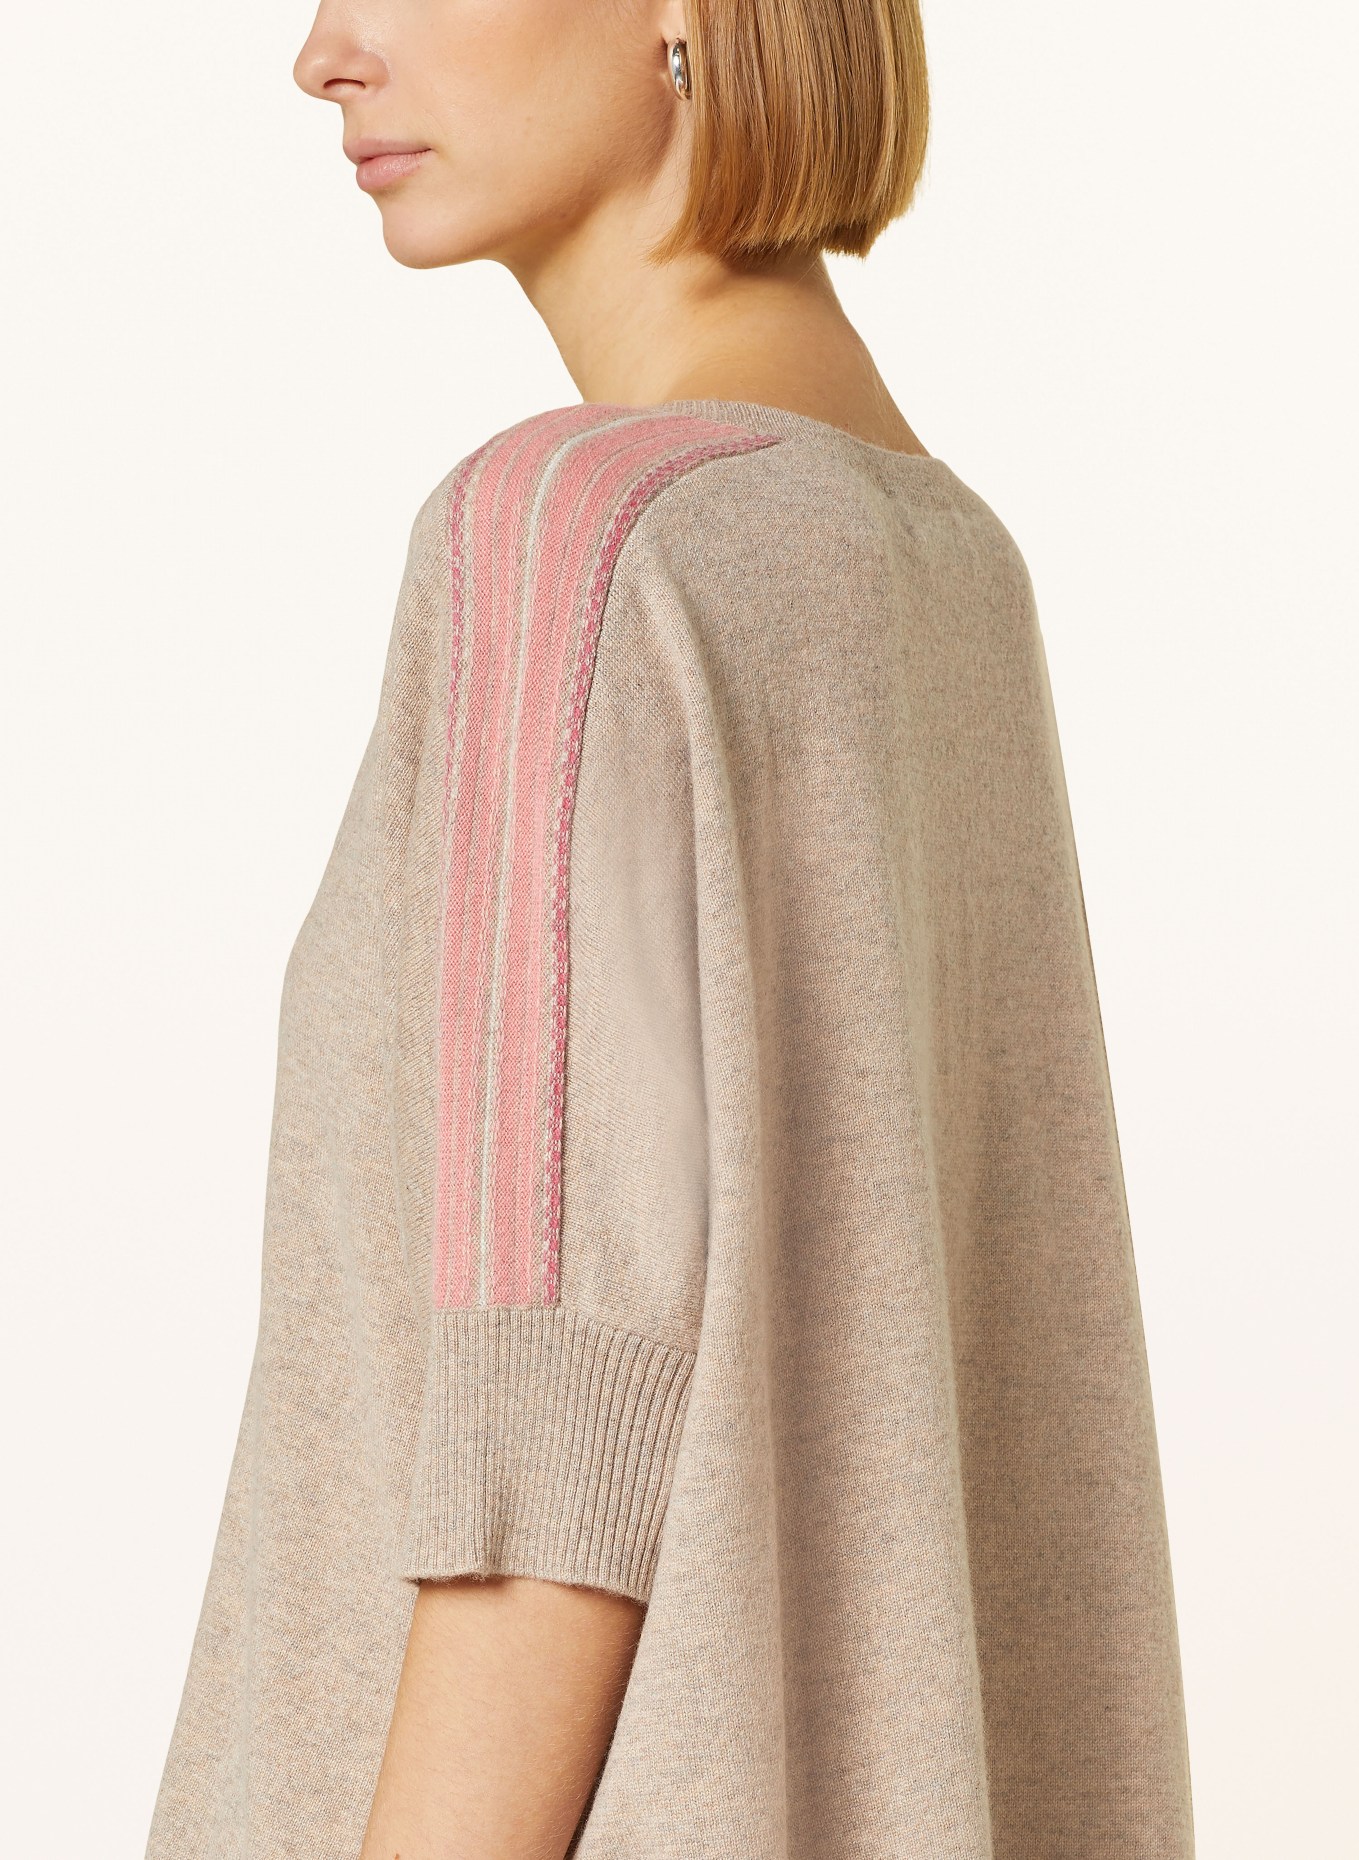 REPEAT Knit shirt in cashmere, Color: BEIGE (Image 4)